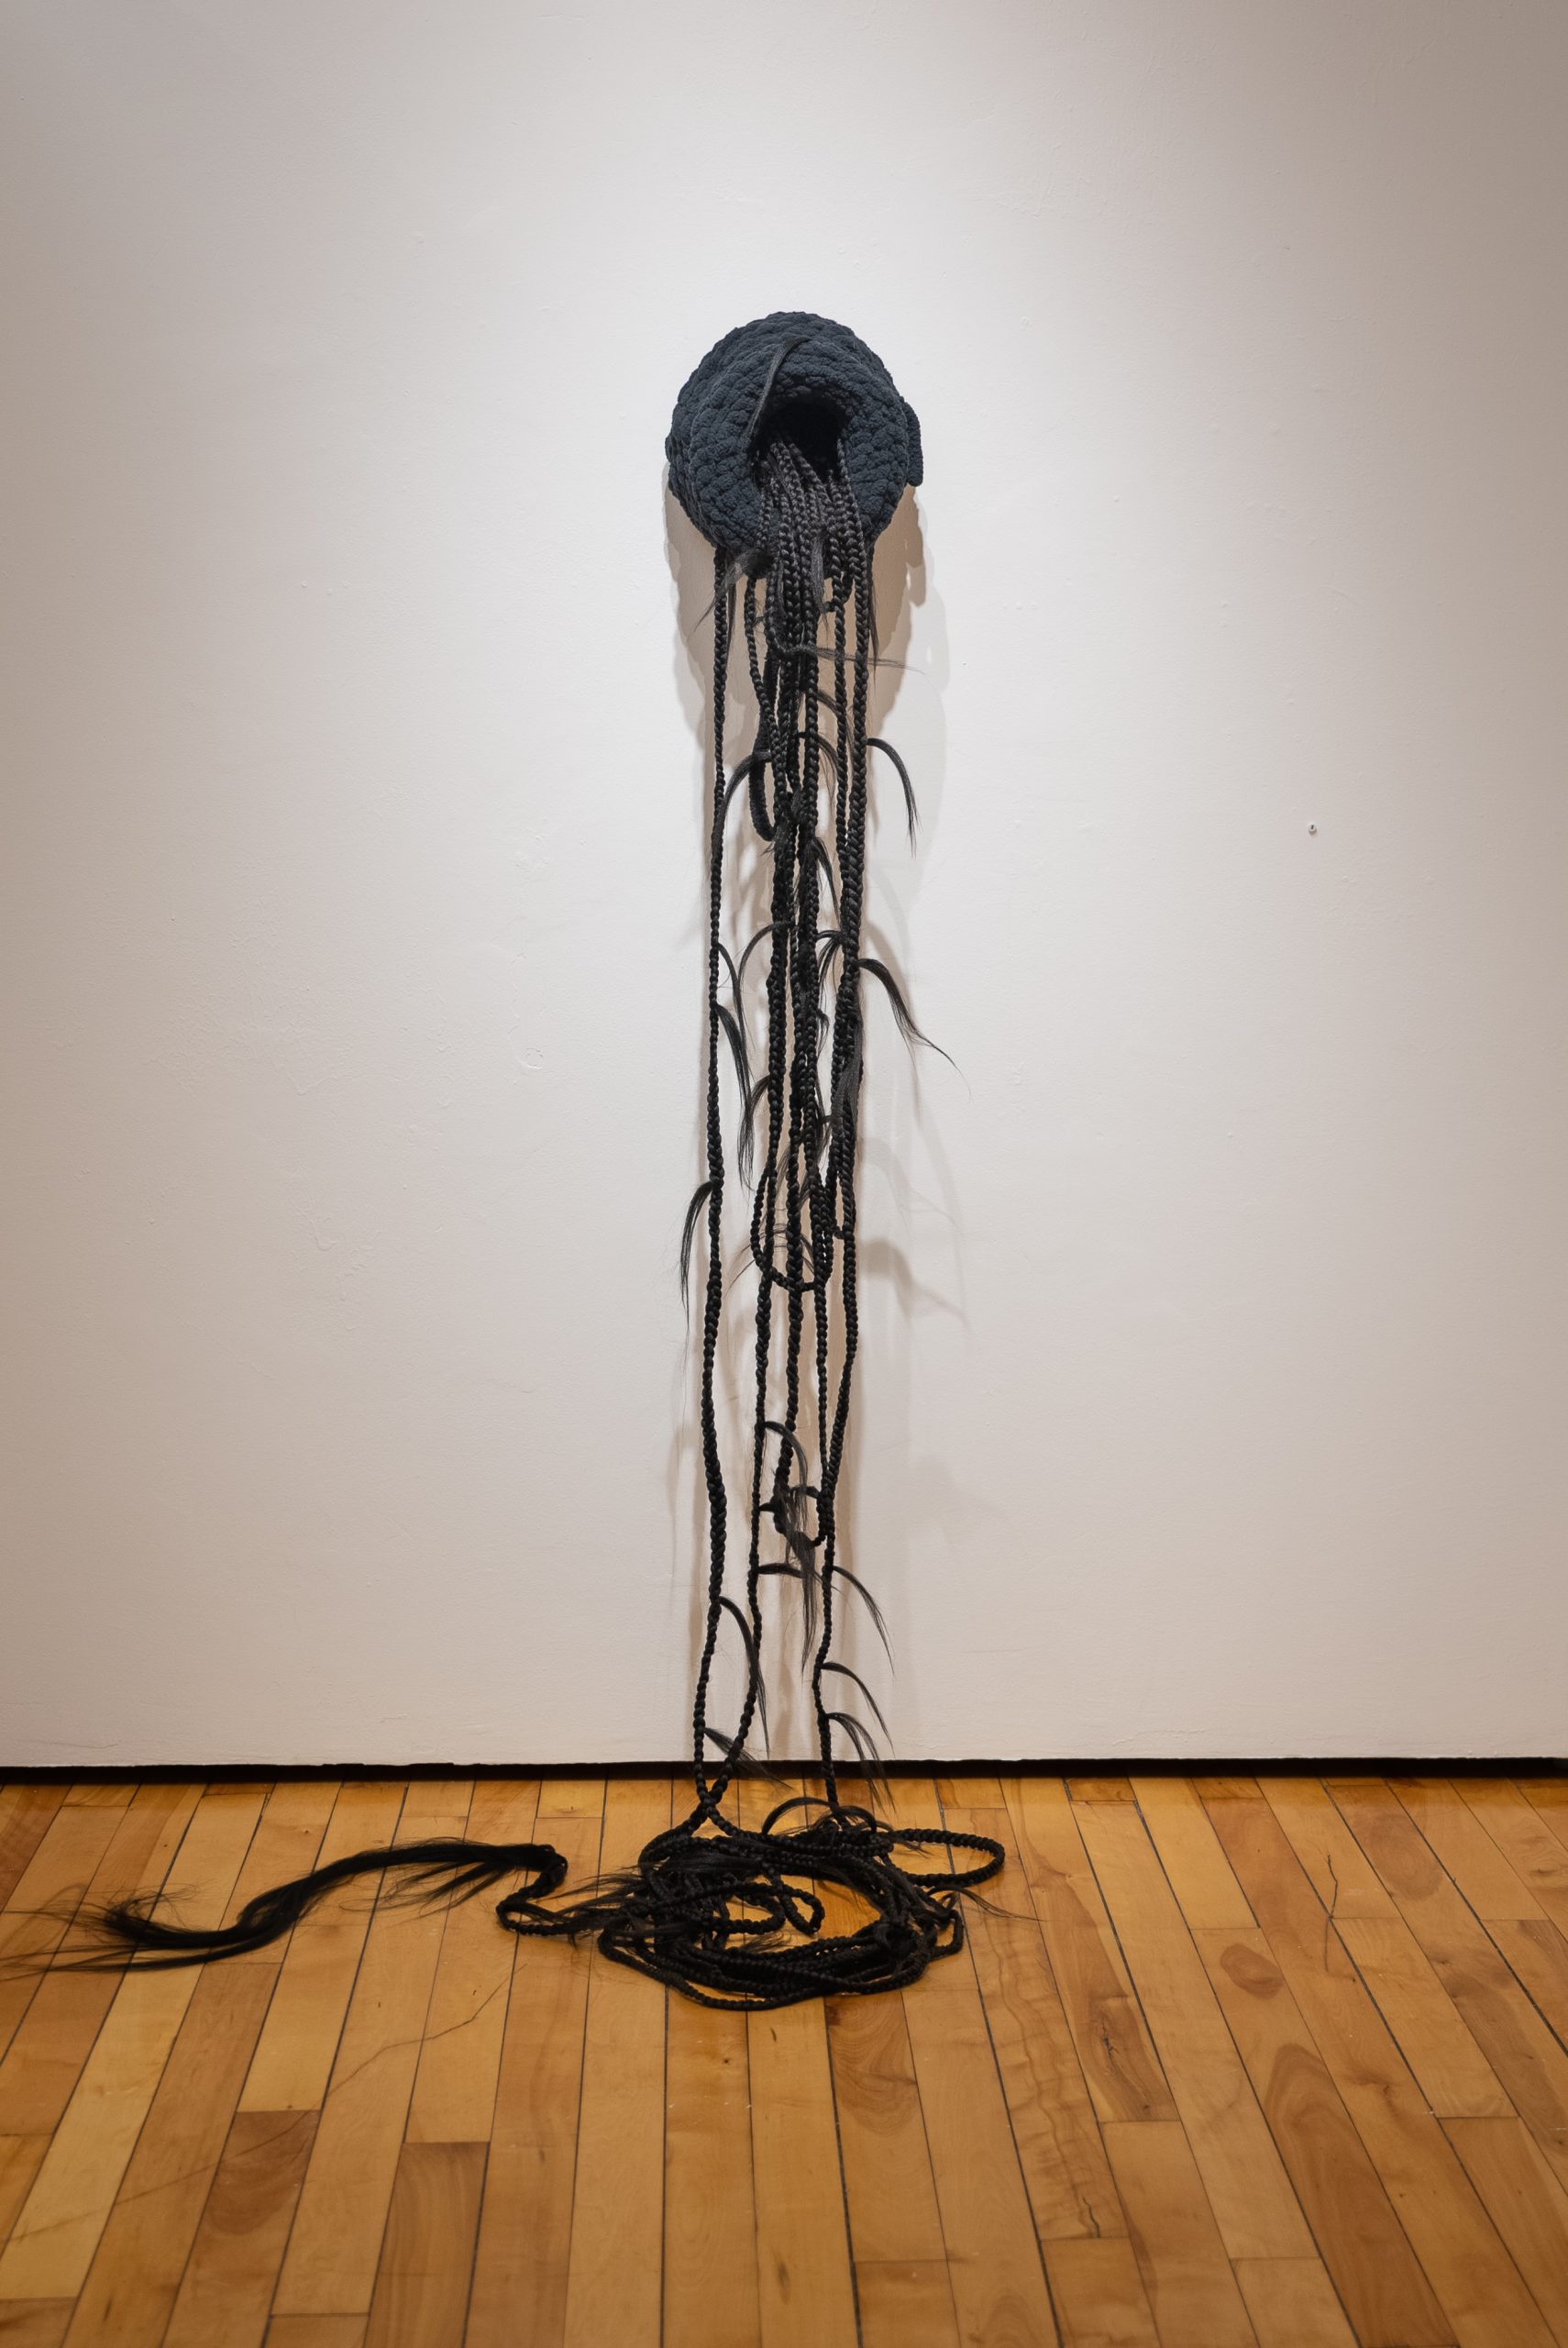 Veronica A. Perez, "infinite distance," 2023. Artificial hair, yarn, bobby pins, 72 in. tall x 12 in. wide x 9 in. deep. Part of shadow / echo / memory, University of Southern Maine Art Gallery, 2023.